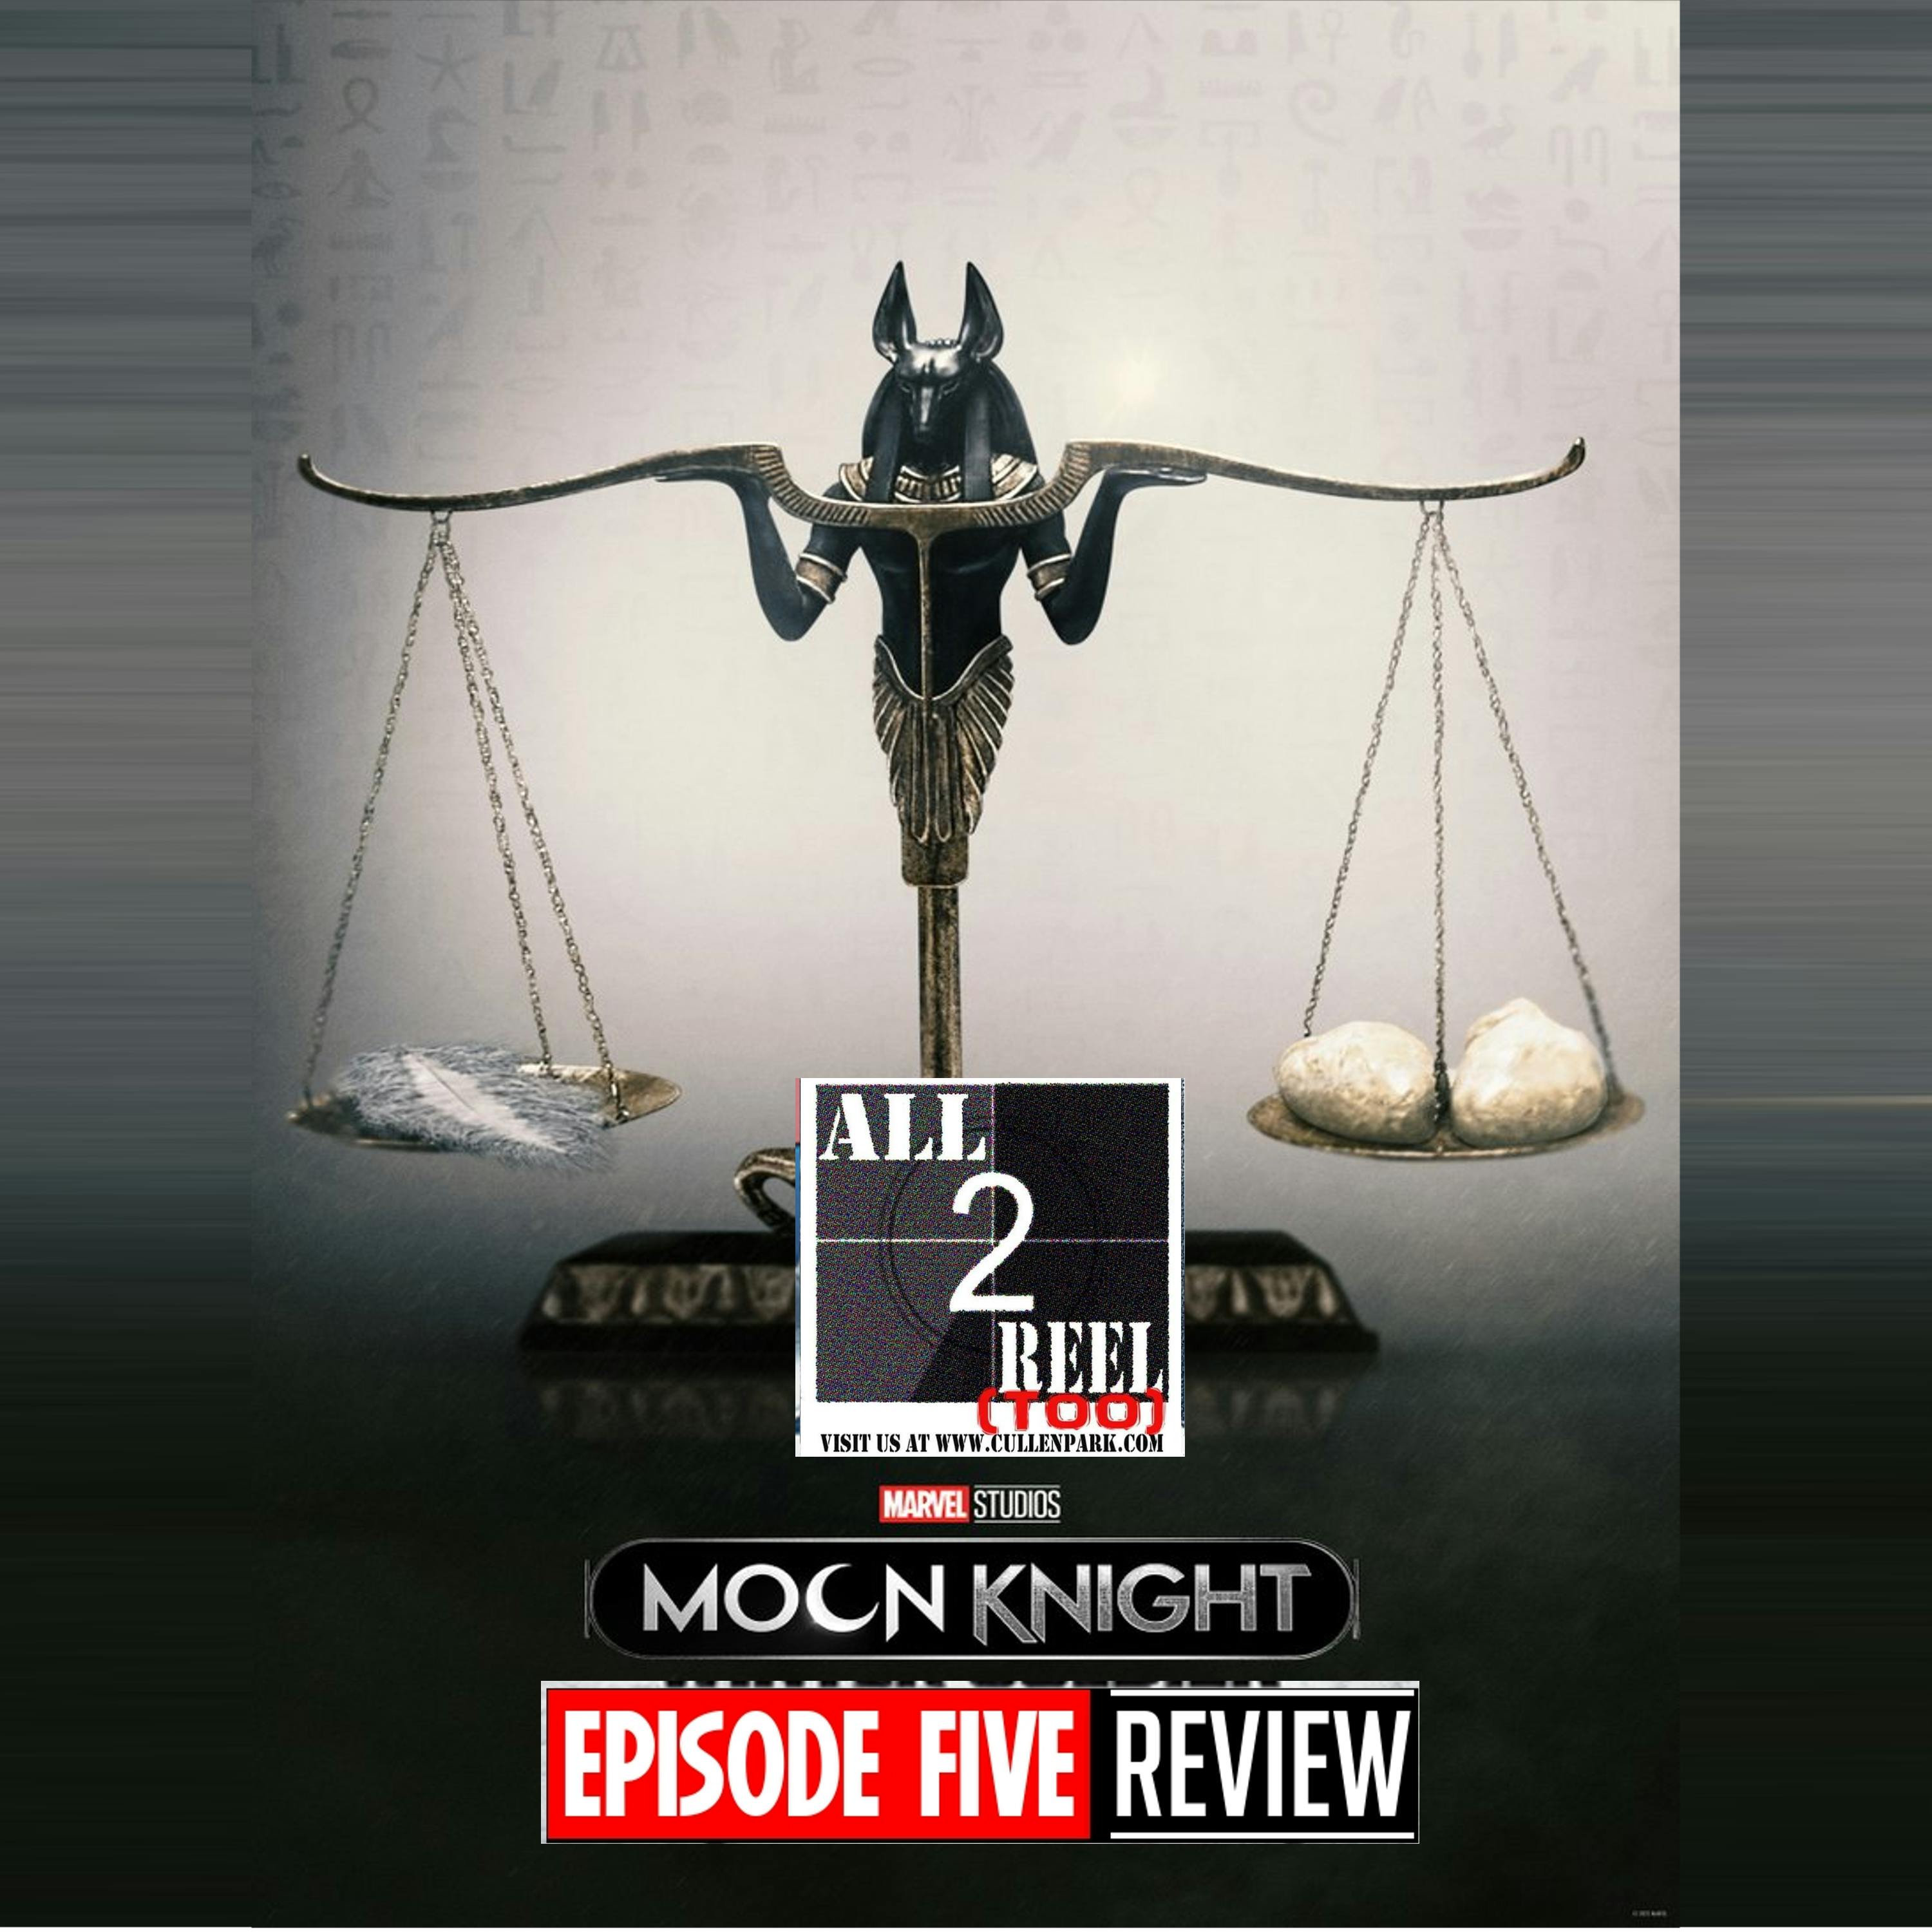 MOON KNIGHT EPISODE 5  REVIEW